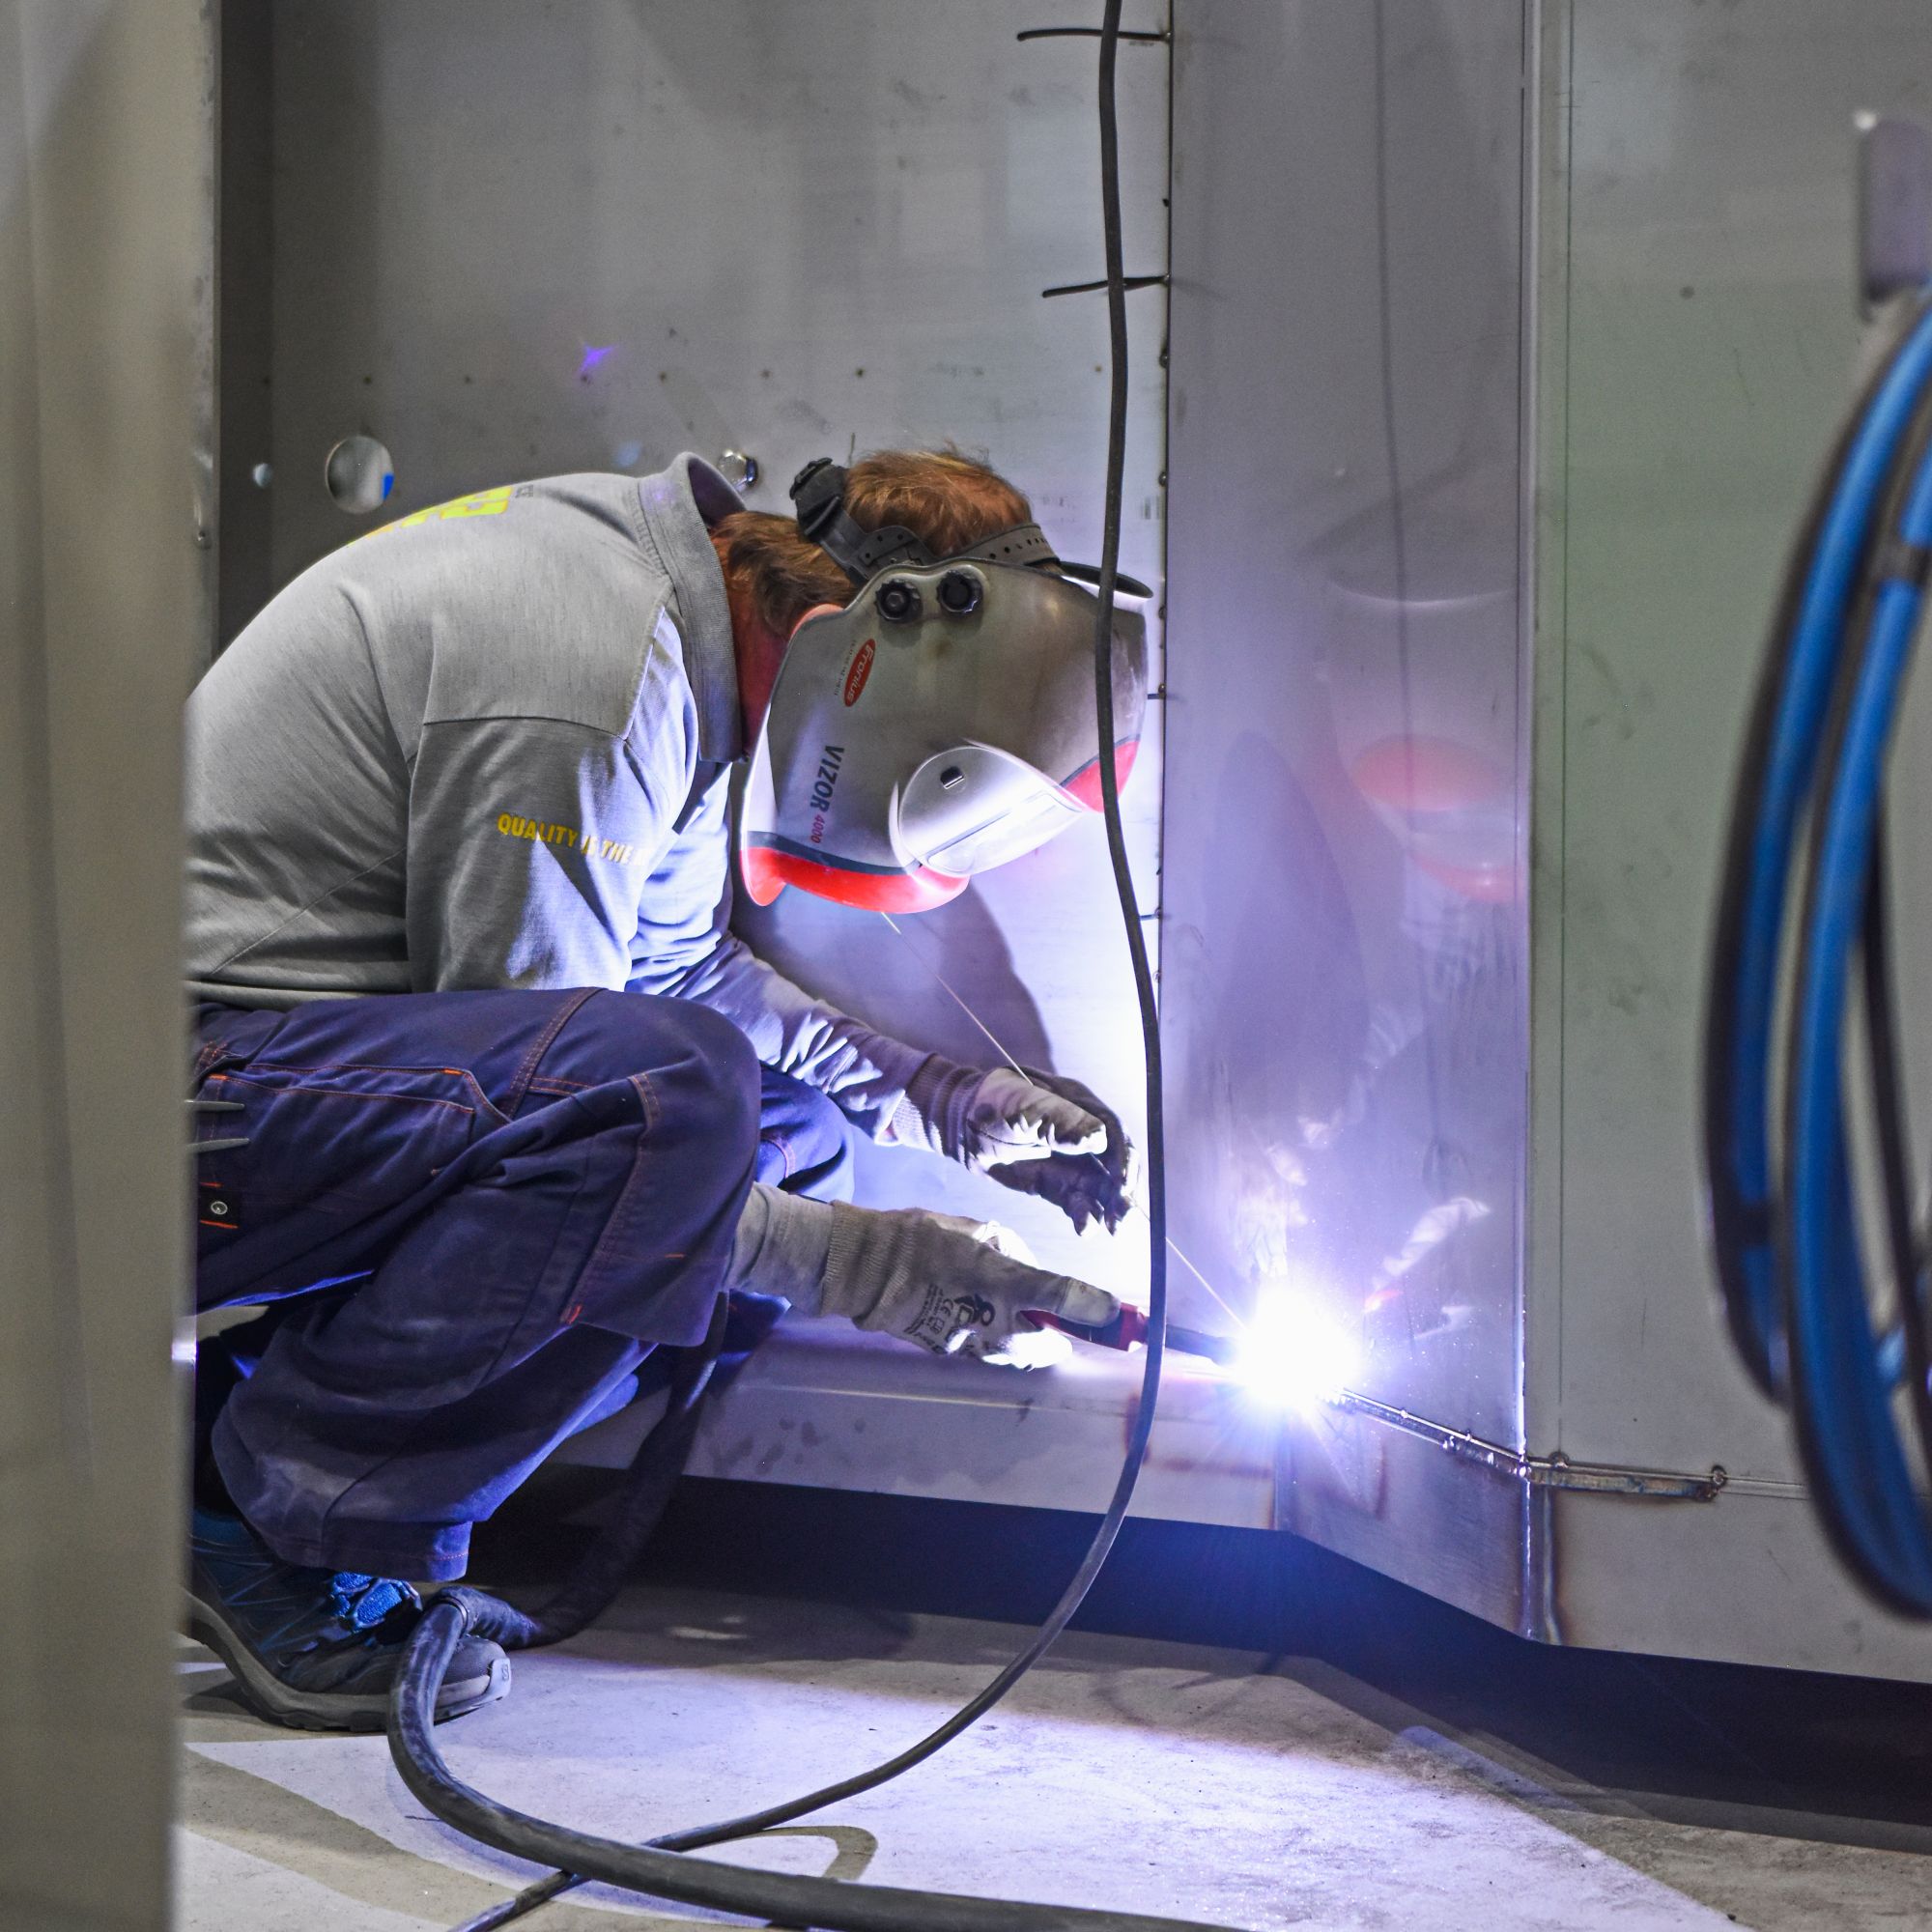 Our production fulfils the demanding requirements for welding